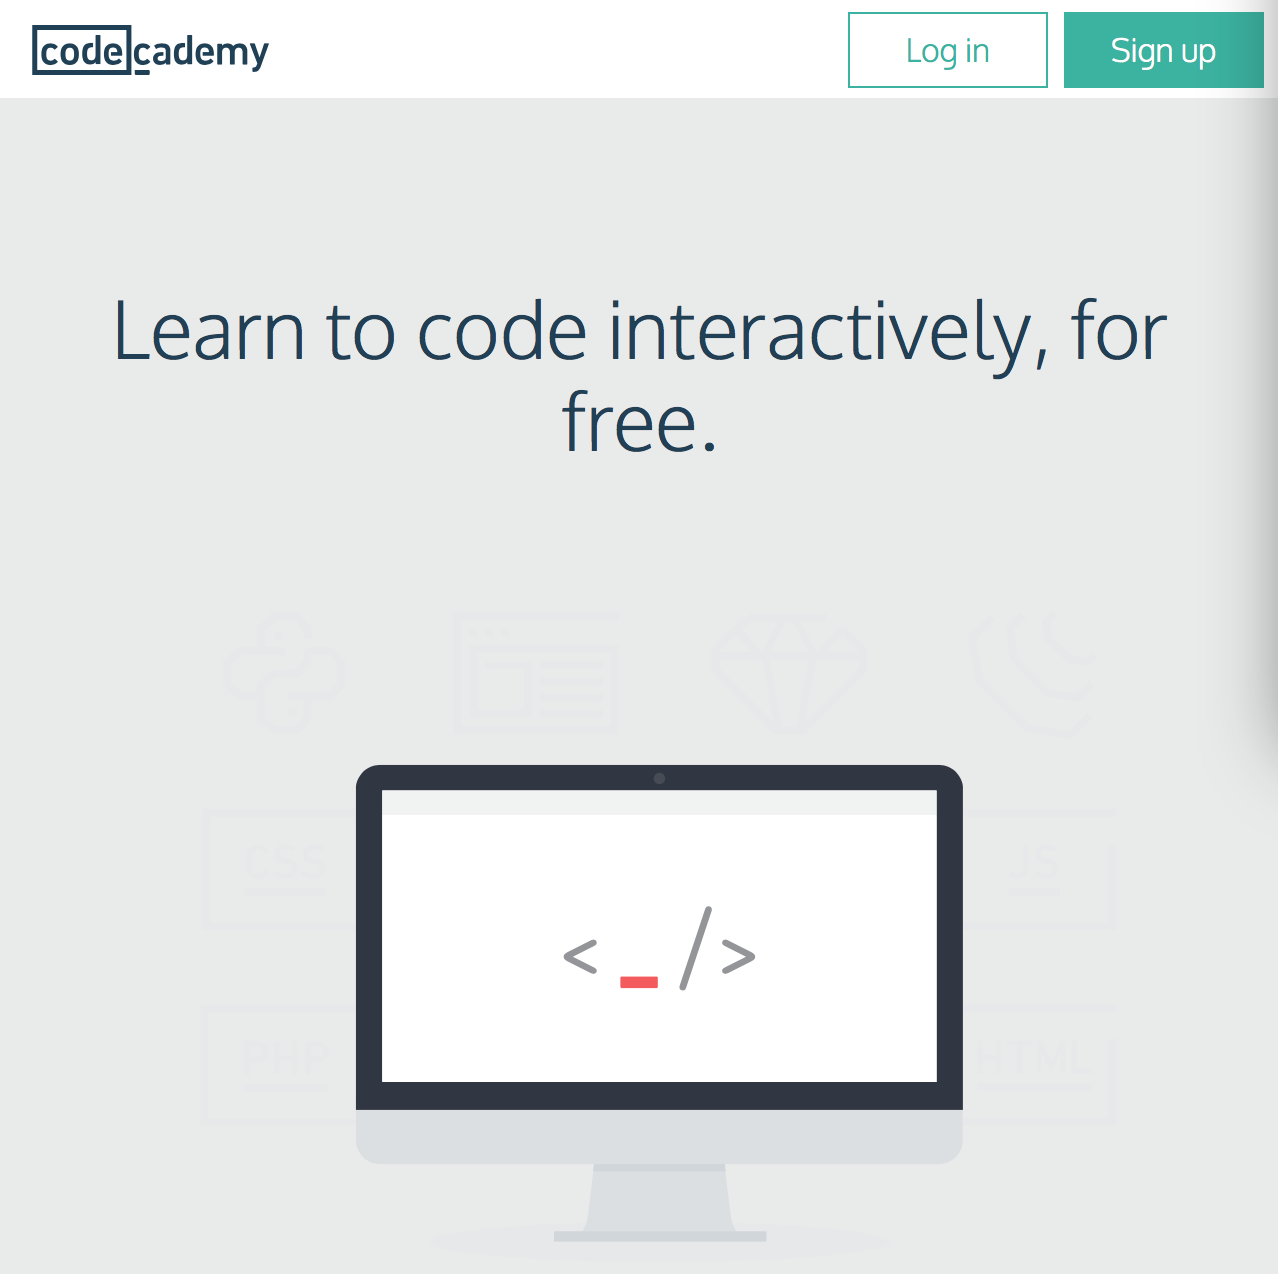 codeacademy.png